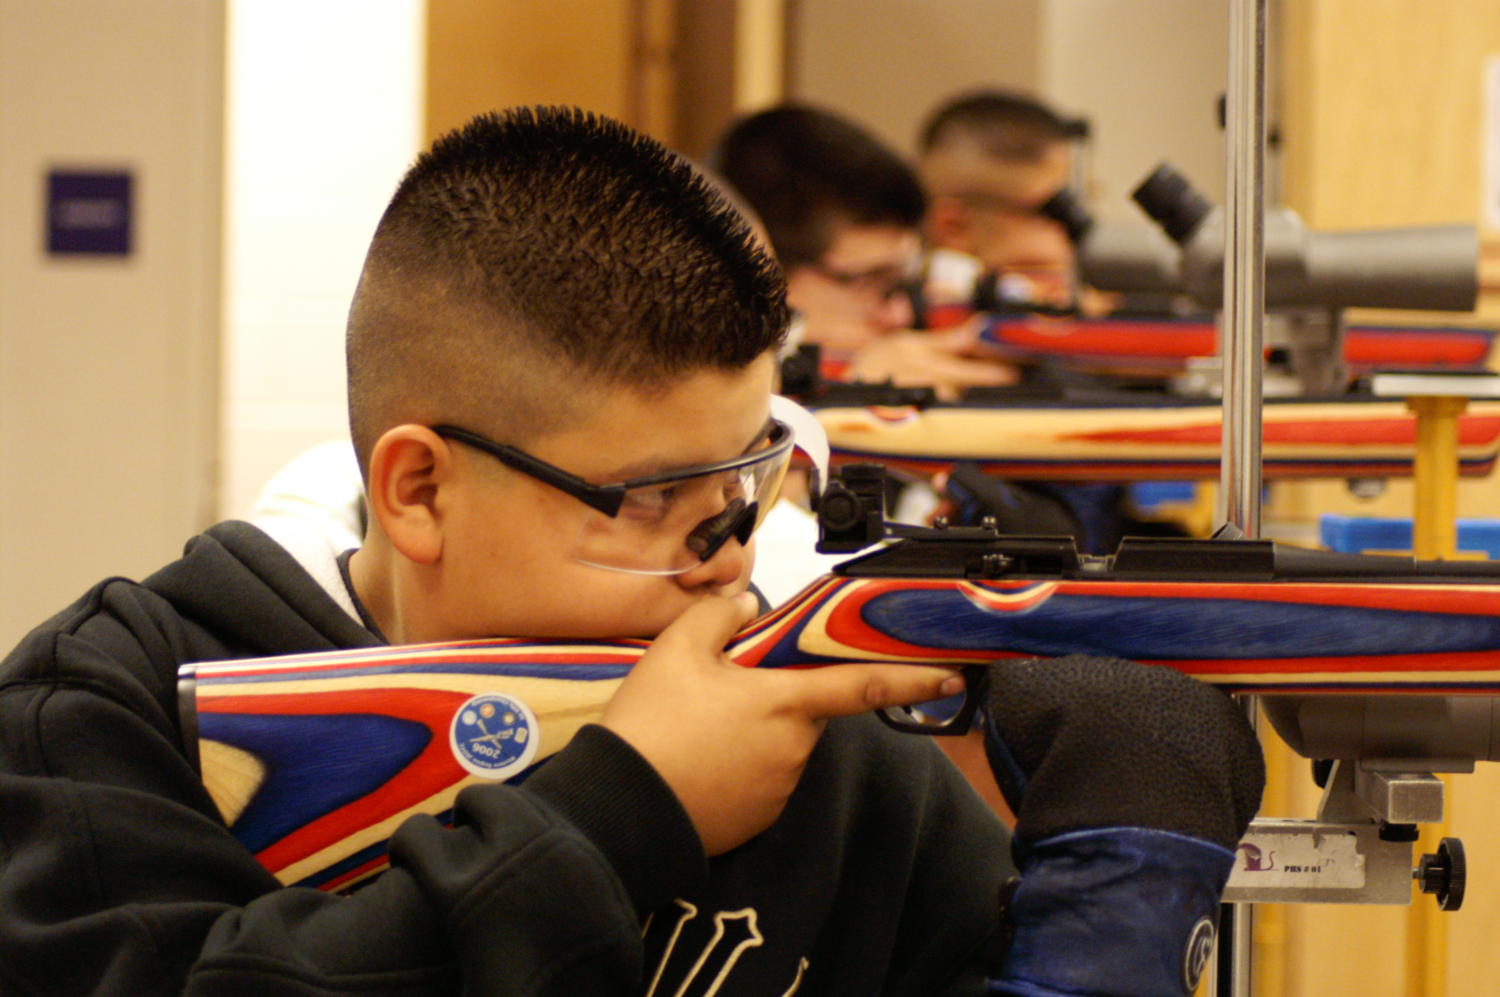 [Air Rifle Team line up for practice]
                                                
                                                    [Sequence #]: 1 of 1
                                                